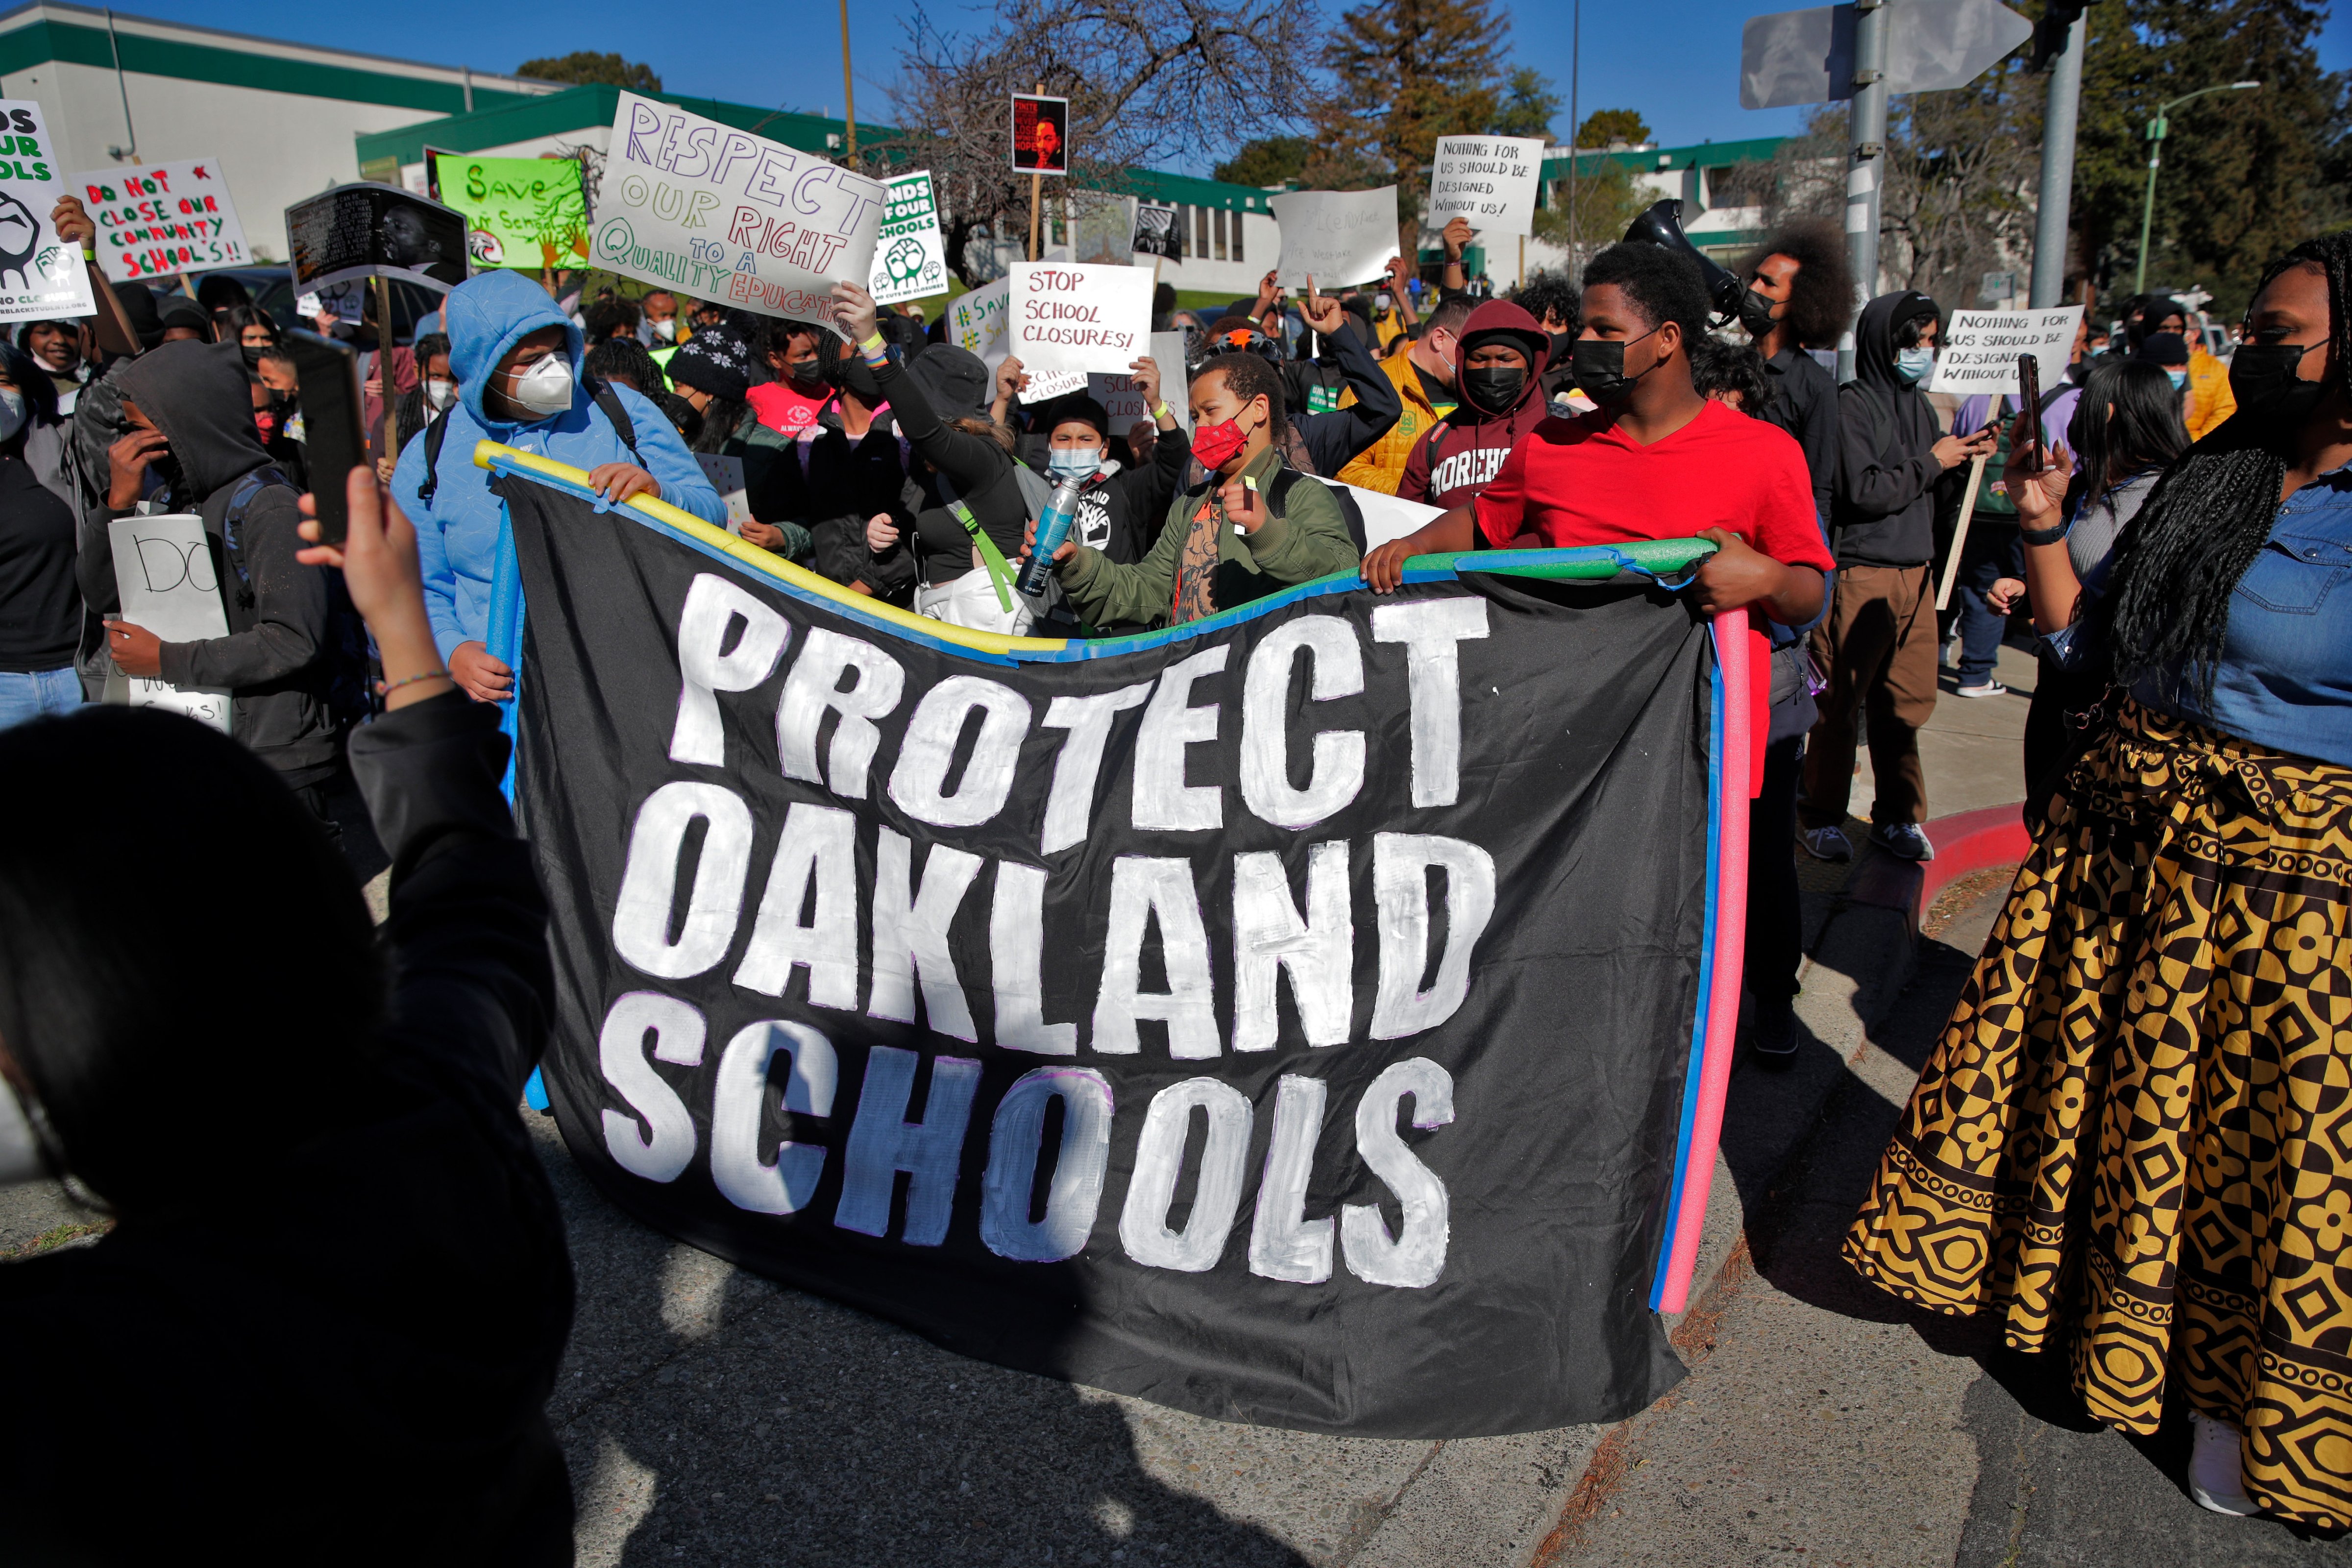 Protesters call for schools to remain open during a demonstration on Feb. 1 in Oakland, Calif., against plans to shut some schools due to declining enrollment. (Carlos Avila Gonzalez—San Francisco Chronicle /Getty Images)